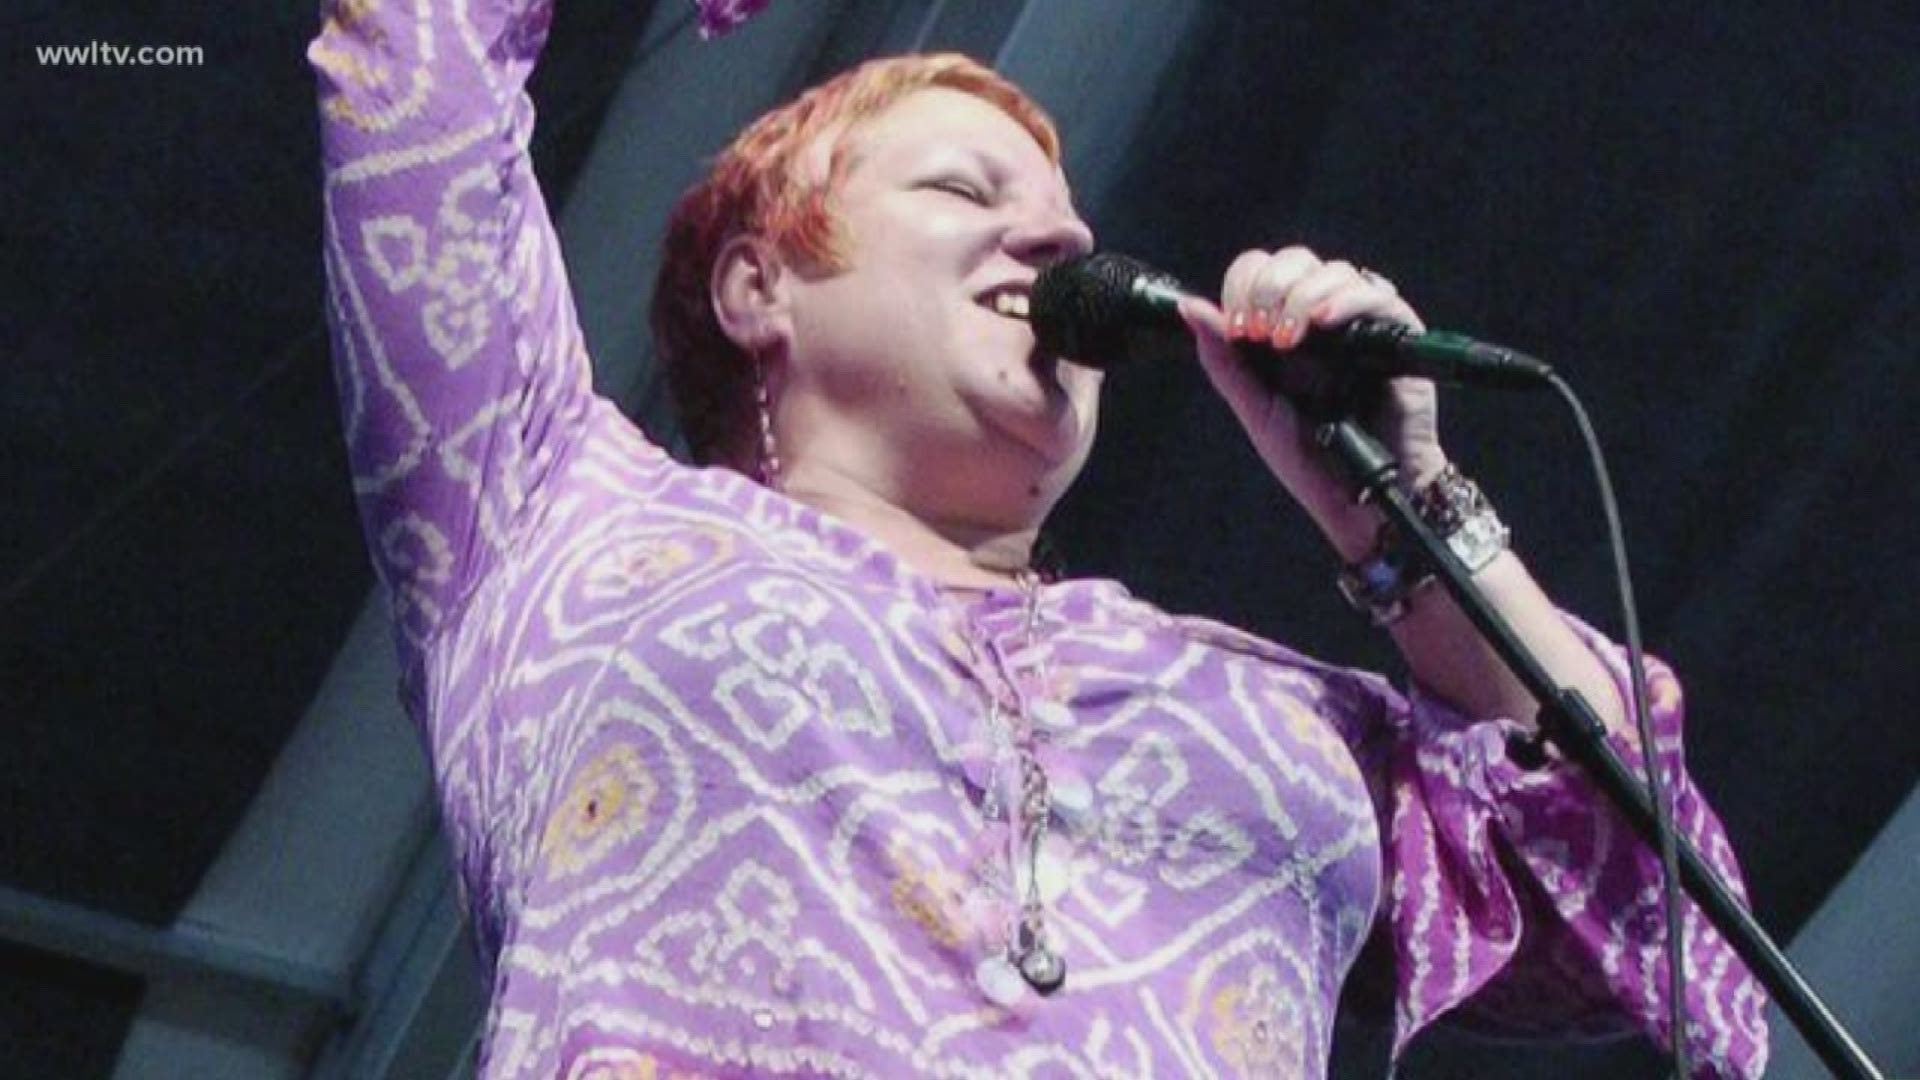 Leigh “Little Queenie” Harris, a star of the New Orleans music scene in the 1970s and 80s with her band Li’l Queenie and the Percolators, died Saturday. She was 65.